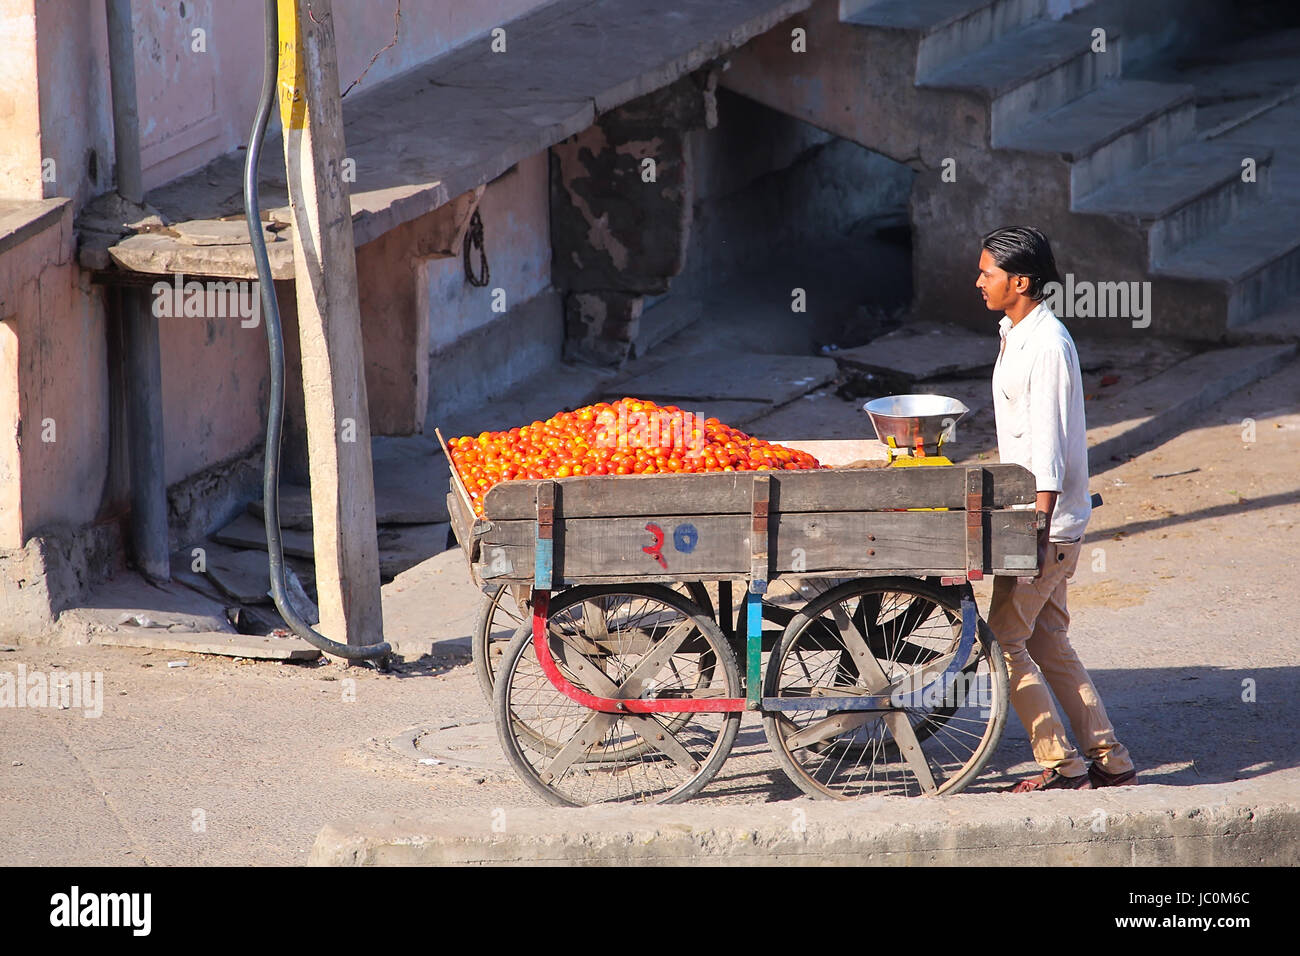 Local man pushing cart with tomatoes in Jaipur, India. Jaipur is the capital and largest city of the Indian state of Rajasthan. Stock Photo